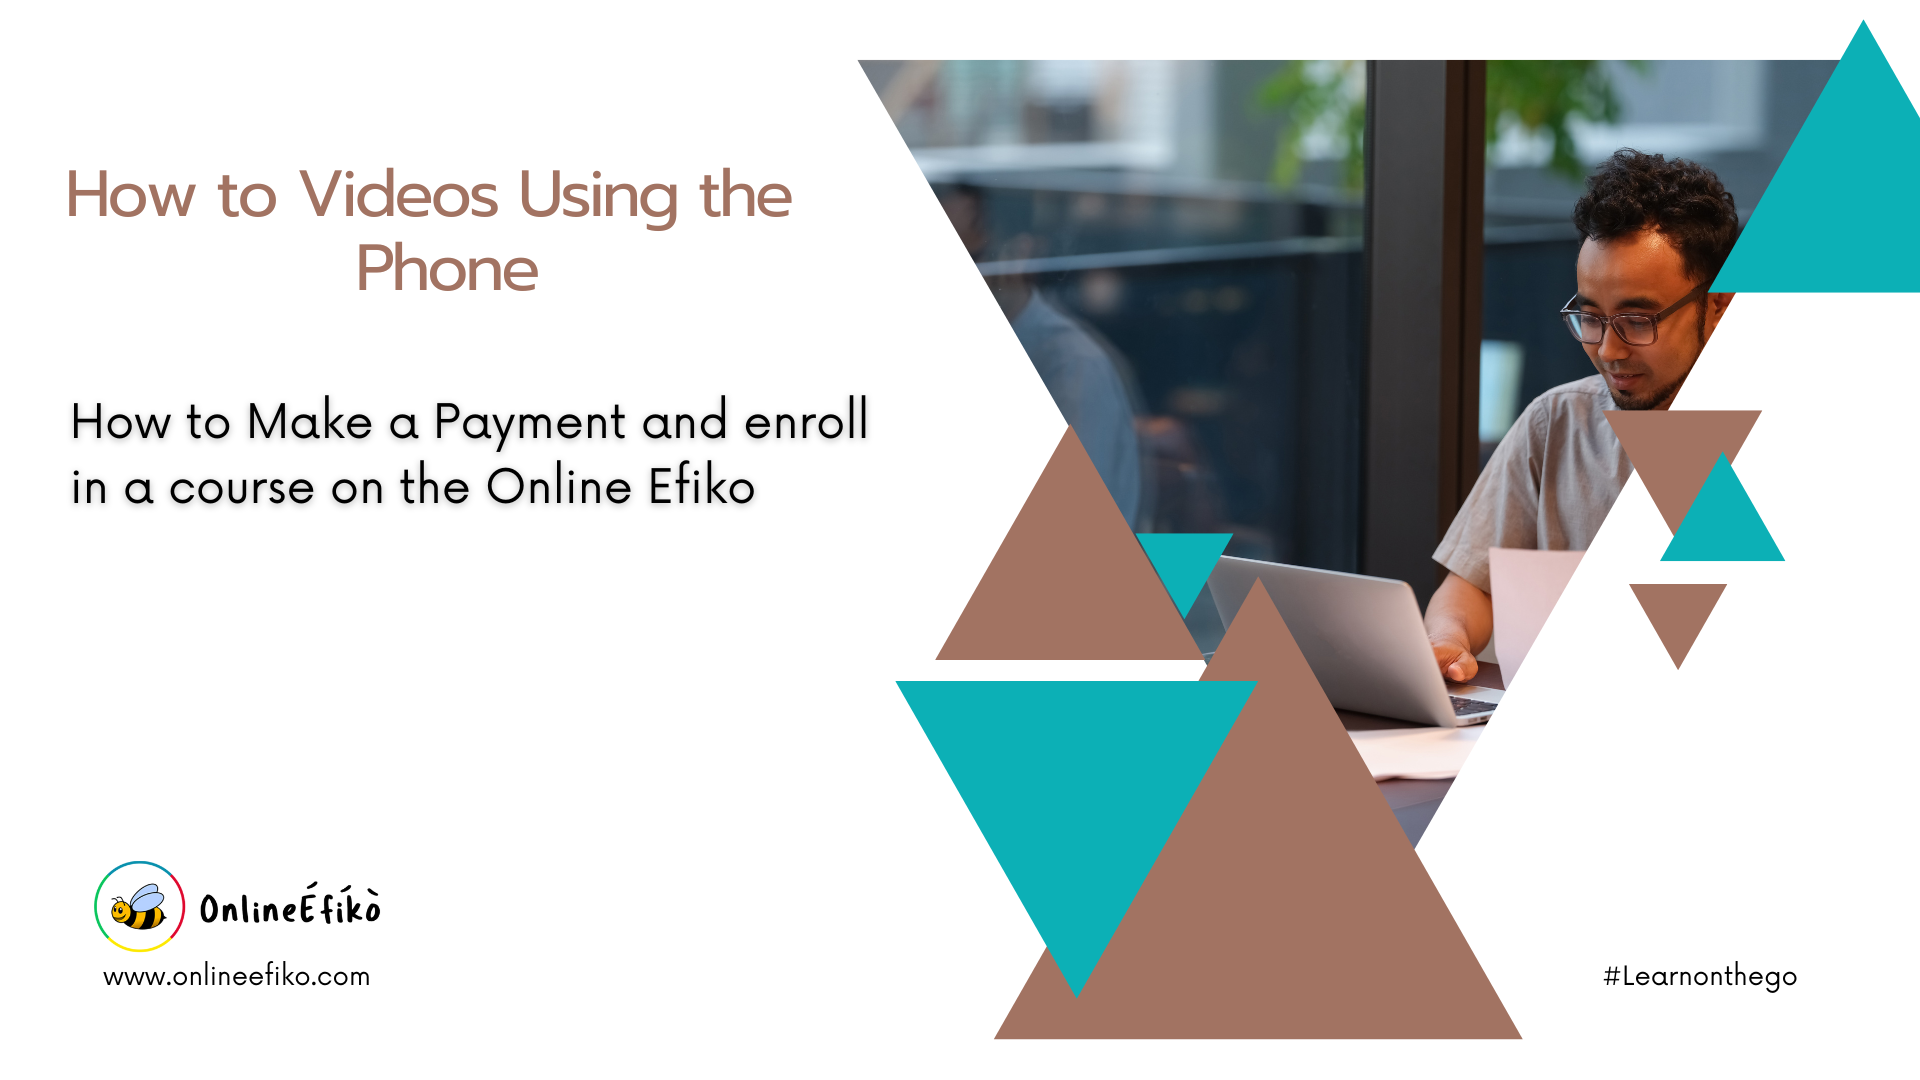 How to Make a Payment and enroll in a course on the Online Efiko